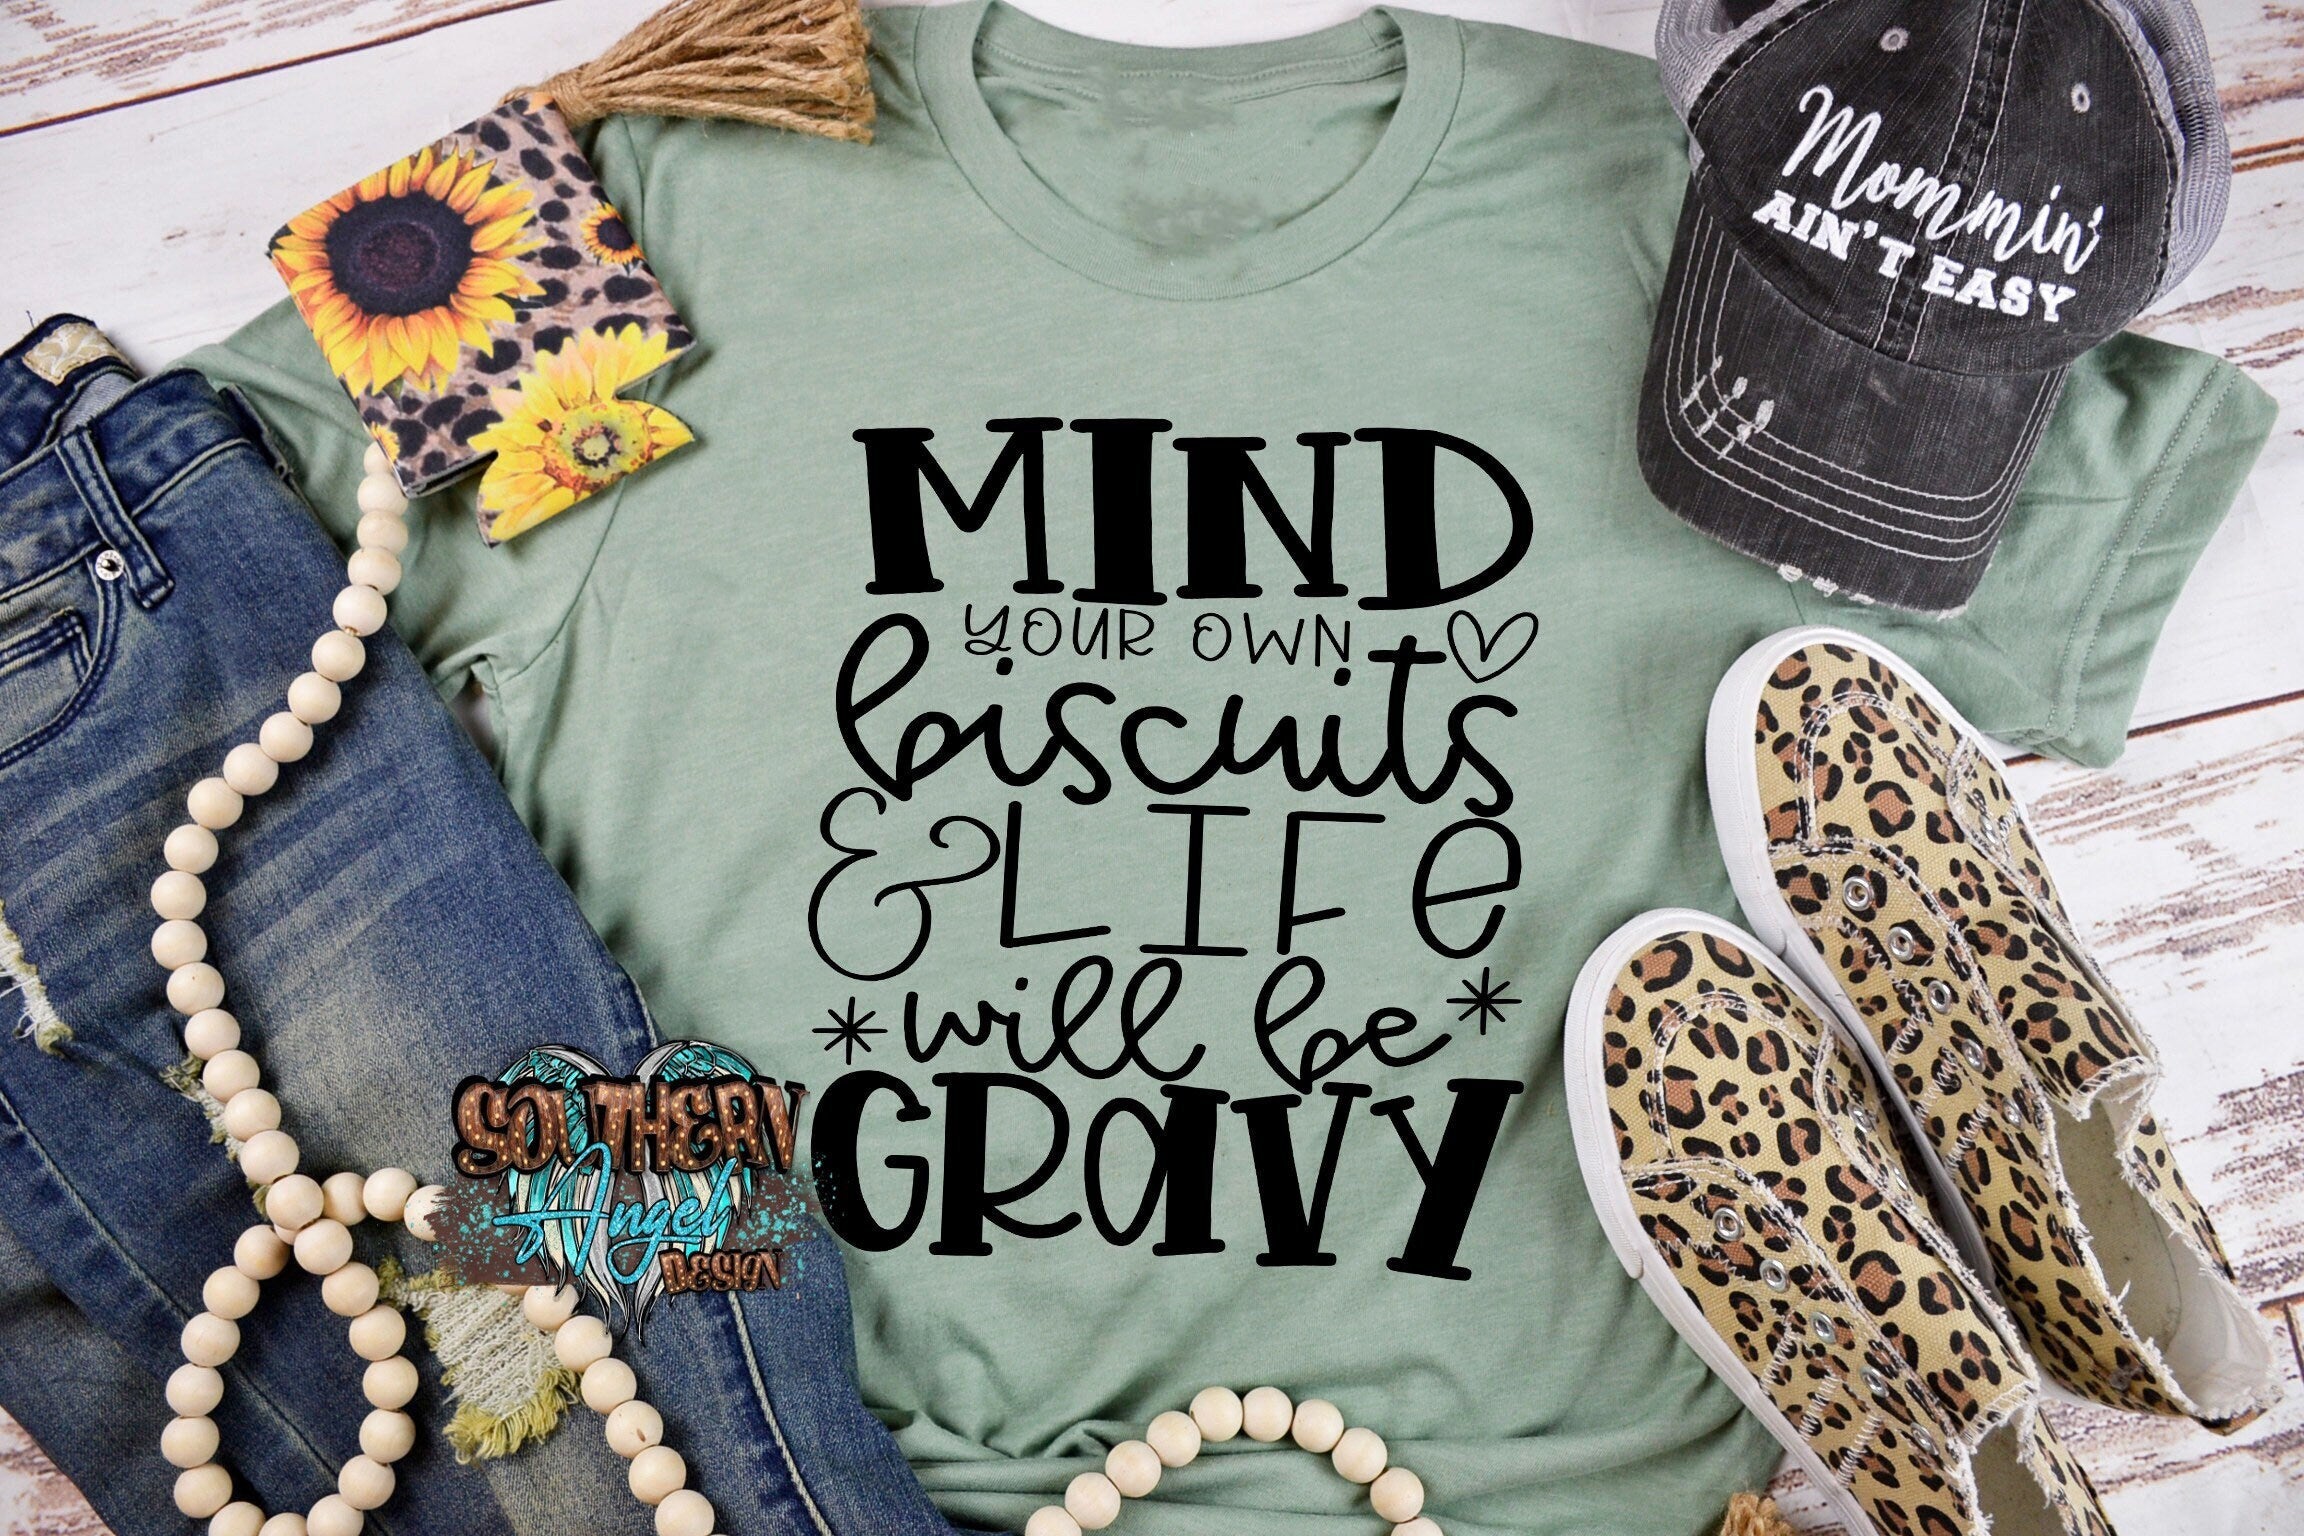 Mind Your Own Biscuits Tshirt, Country western TShirt, Cowhide TShirt, Country lyrics Tshirt, Western Tshirt, Rustic TShirt